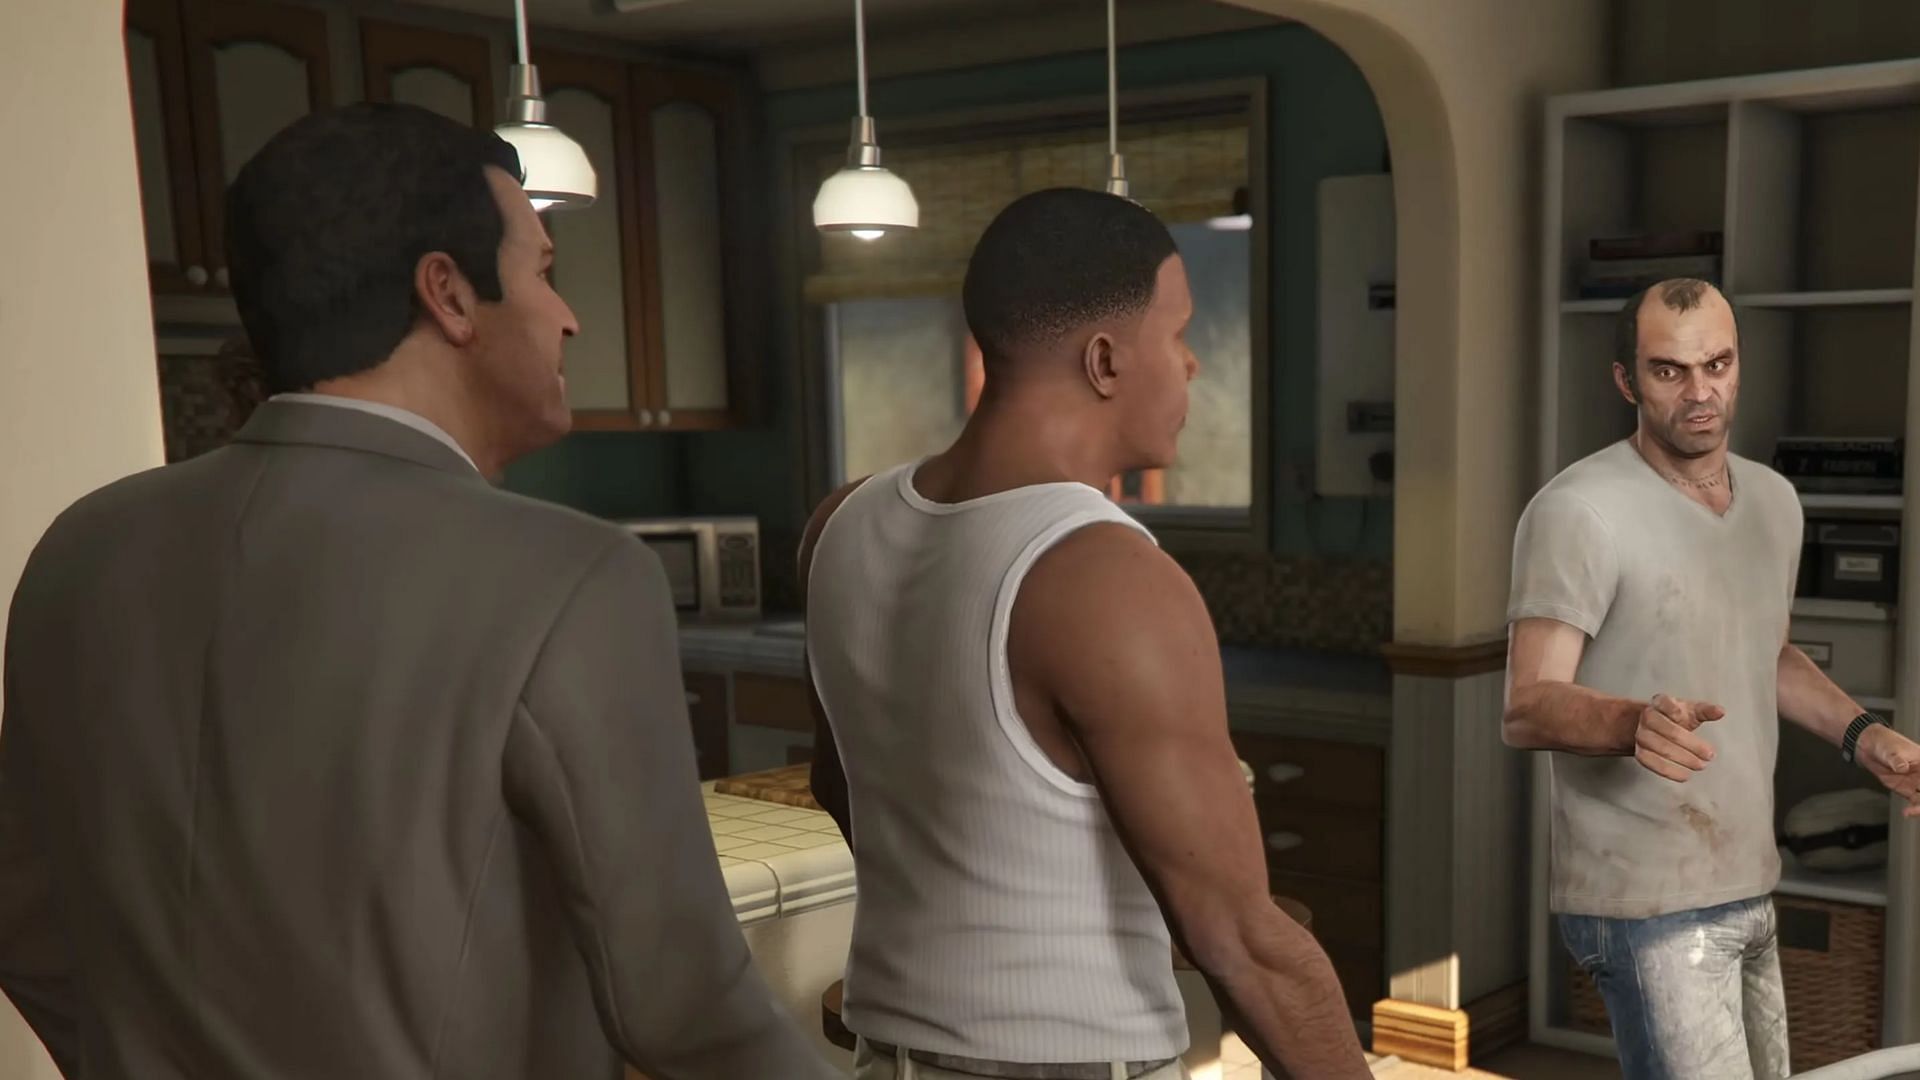 GTA 5 reportedly ranked among top 10 downloaded PS5 and PS4 games